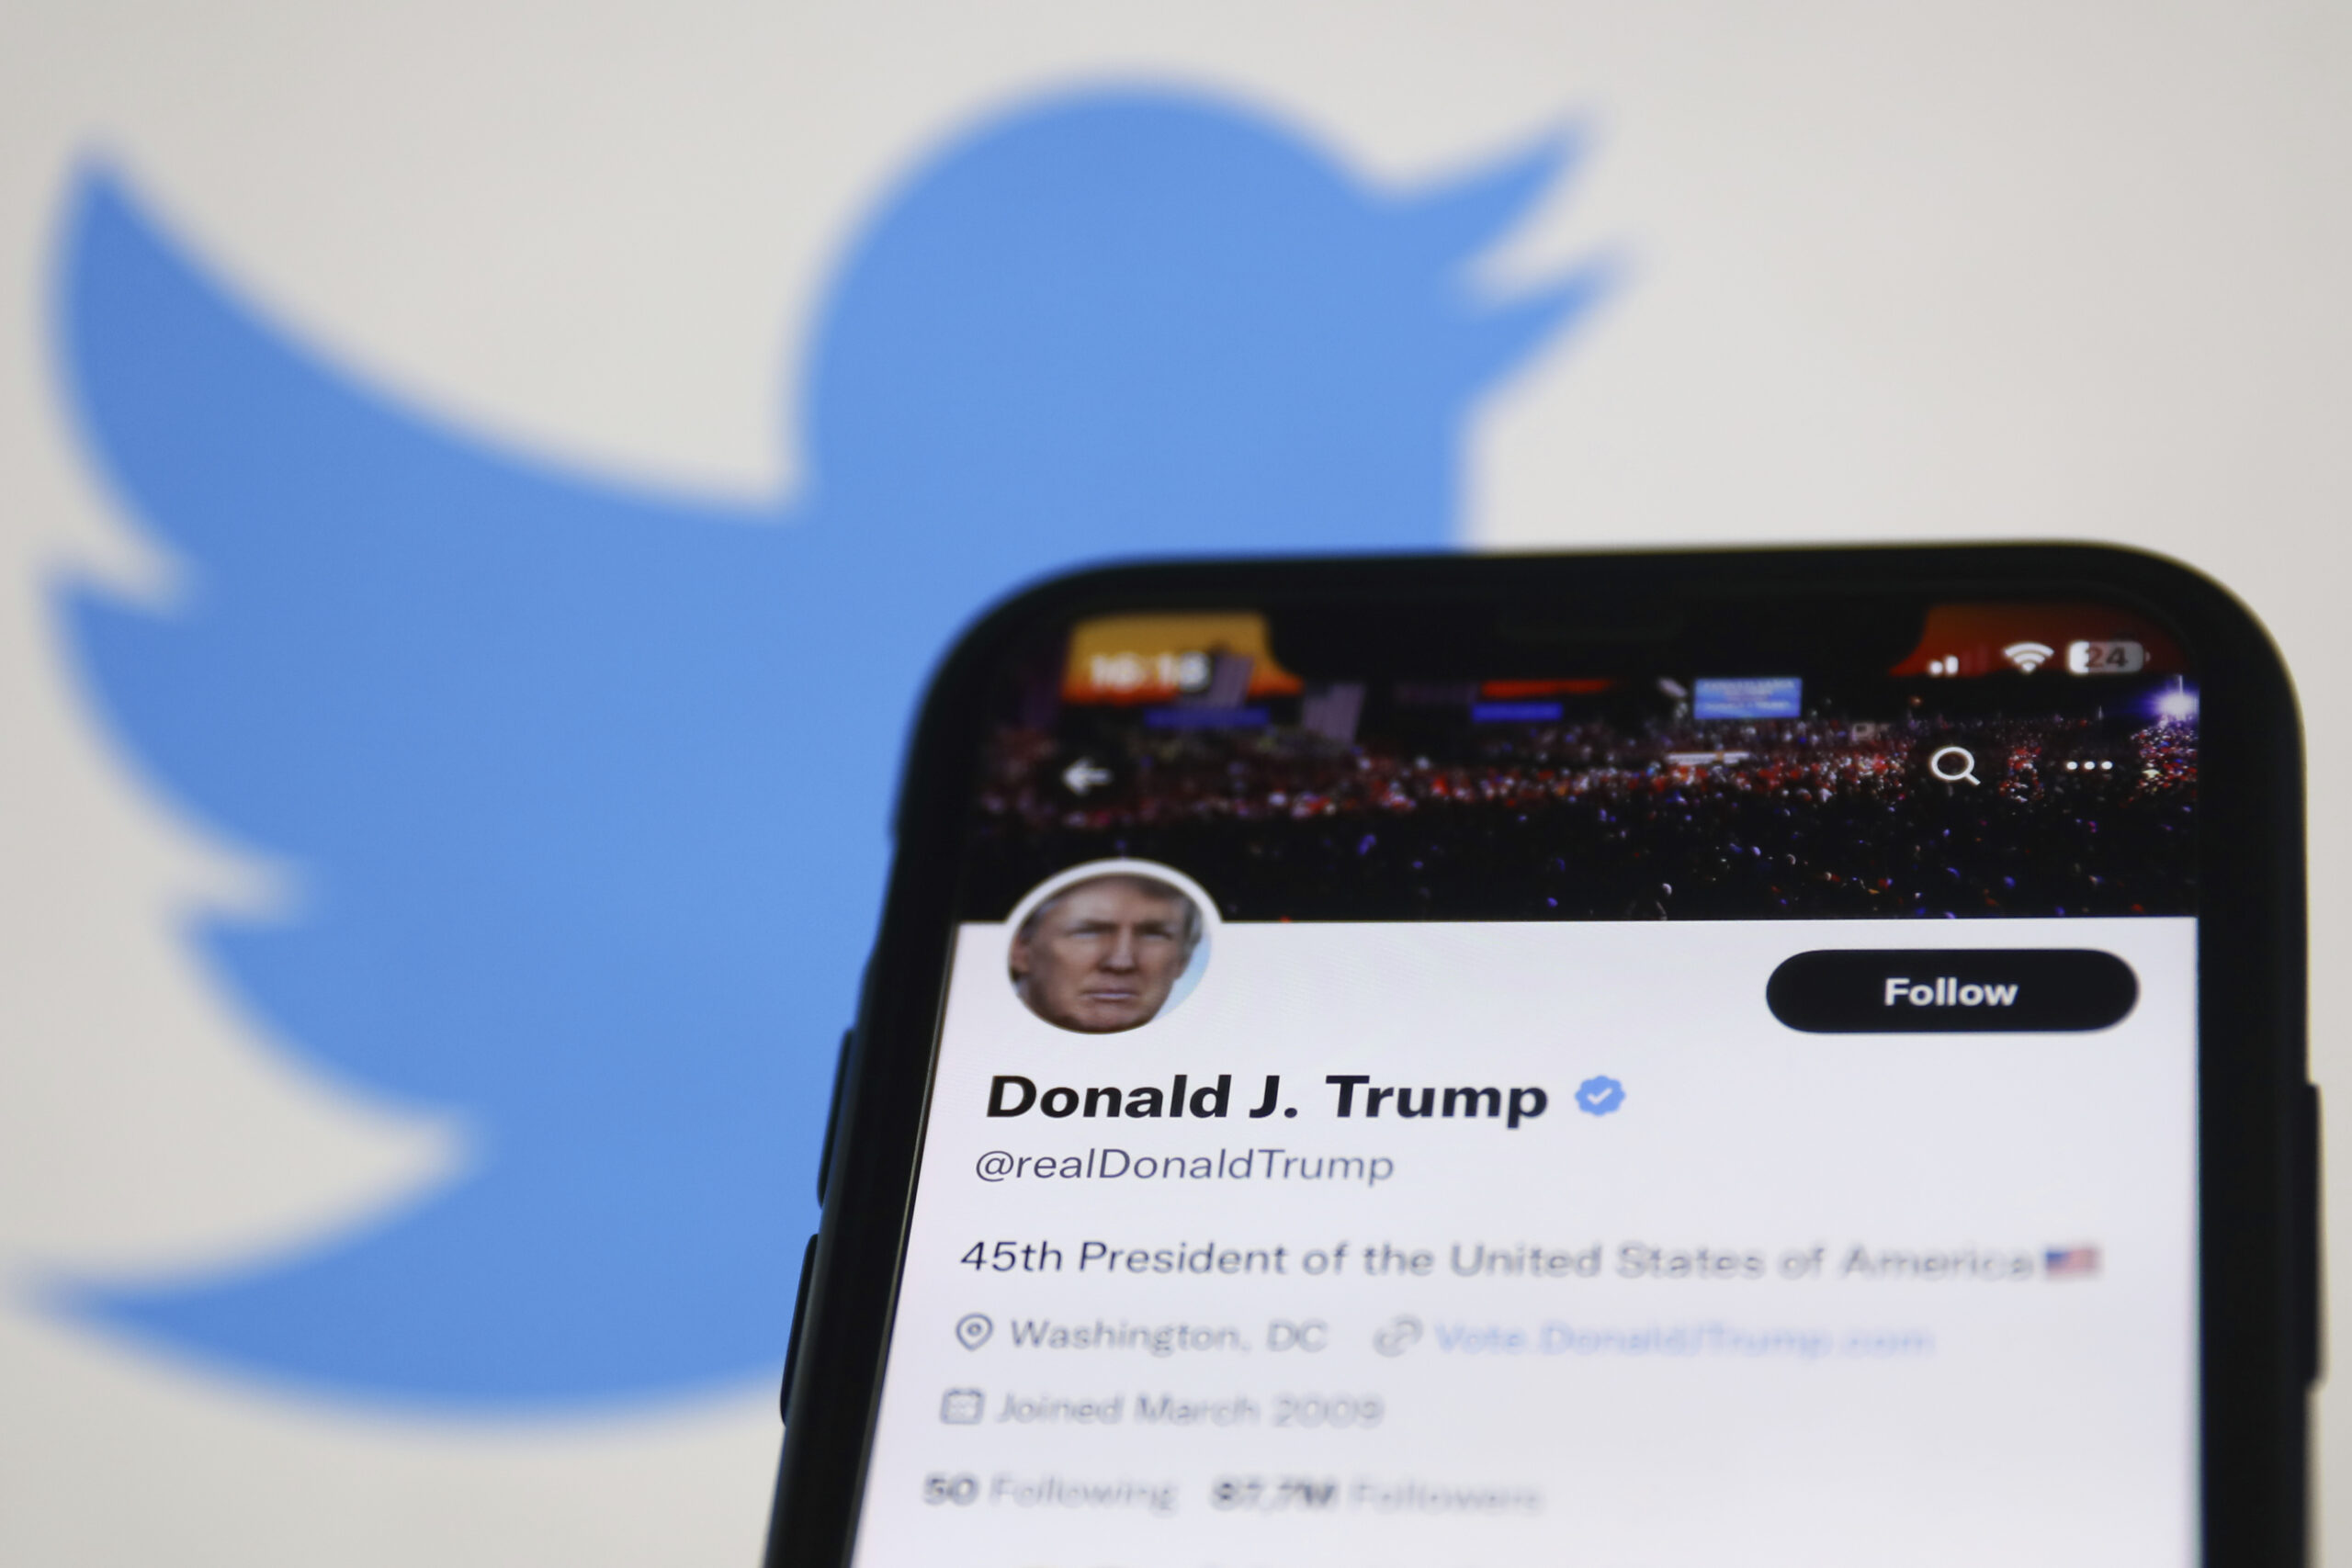 Trump Returns to Twitter With First Post Since January 2021 Ban